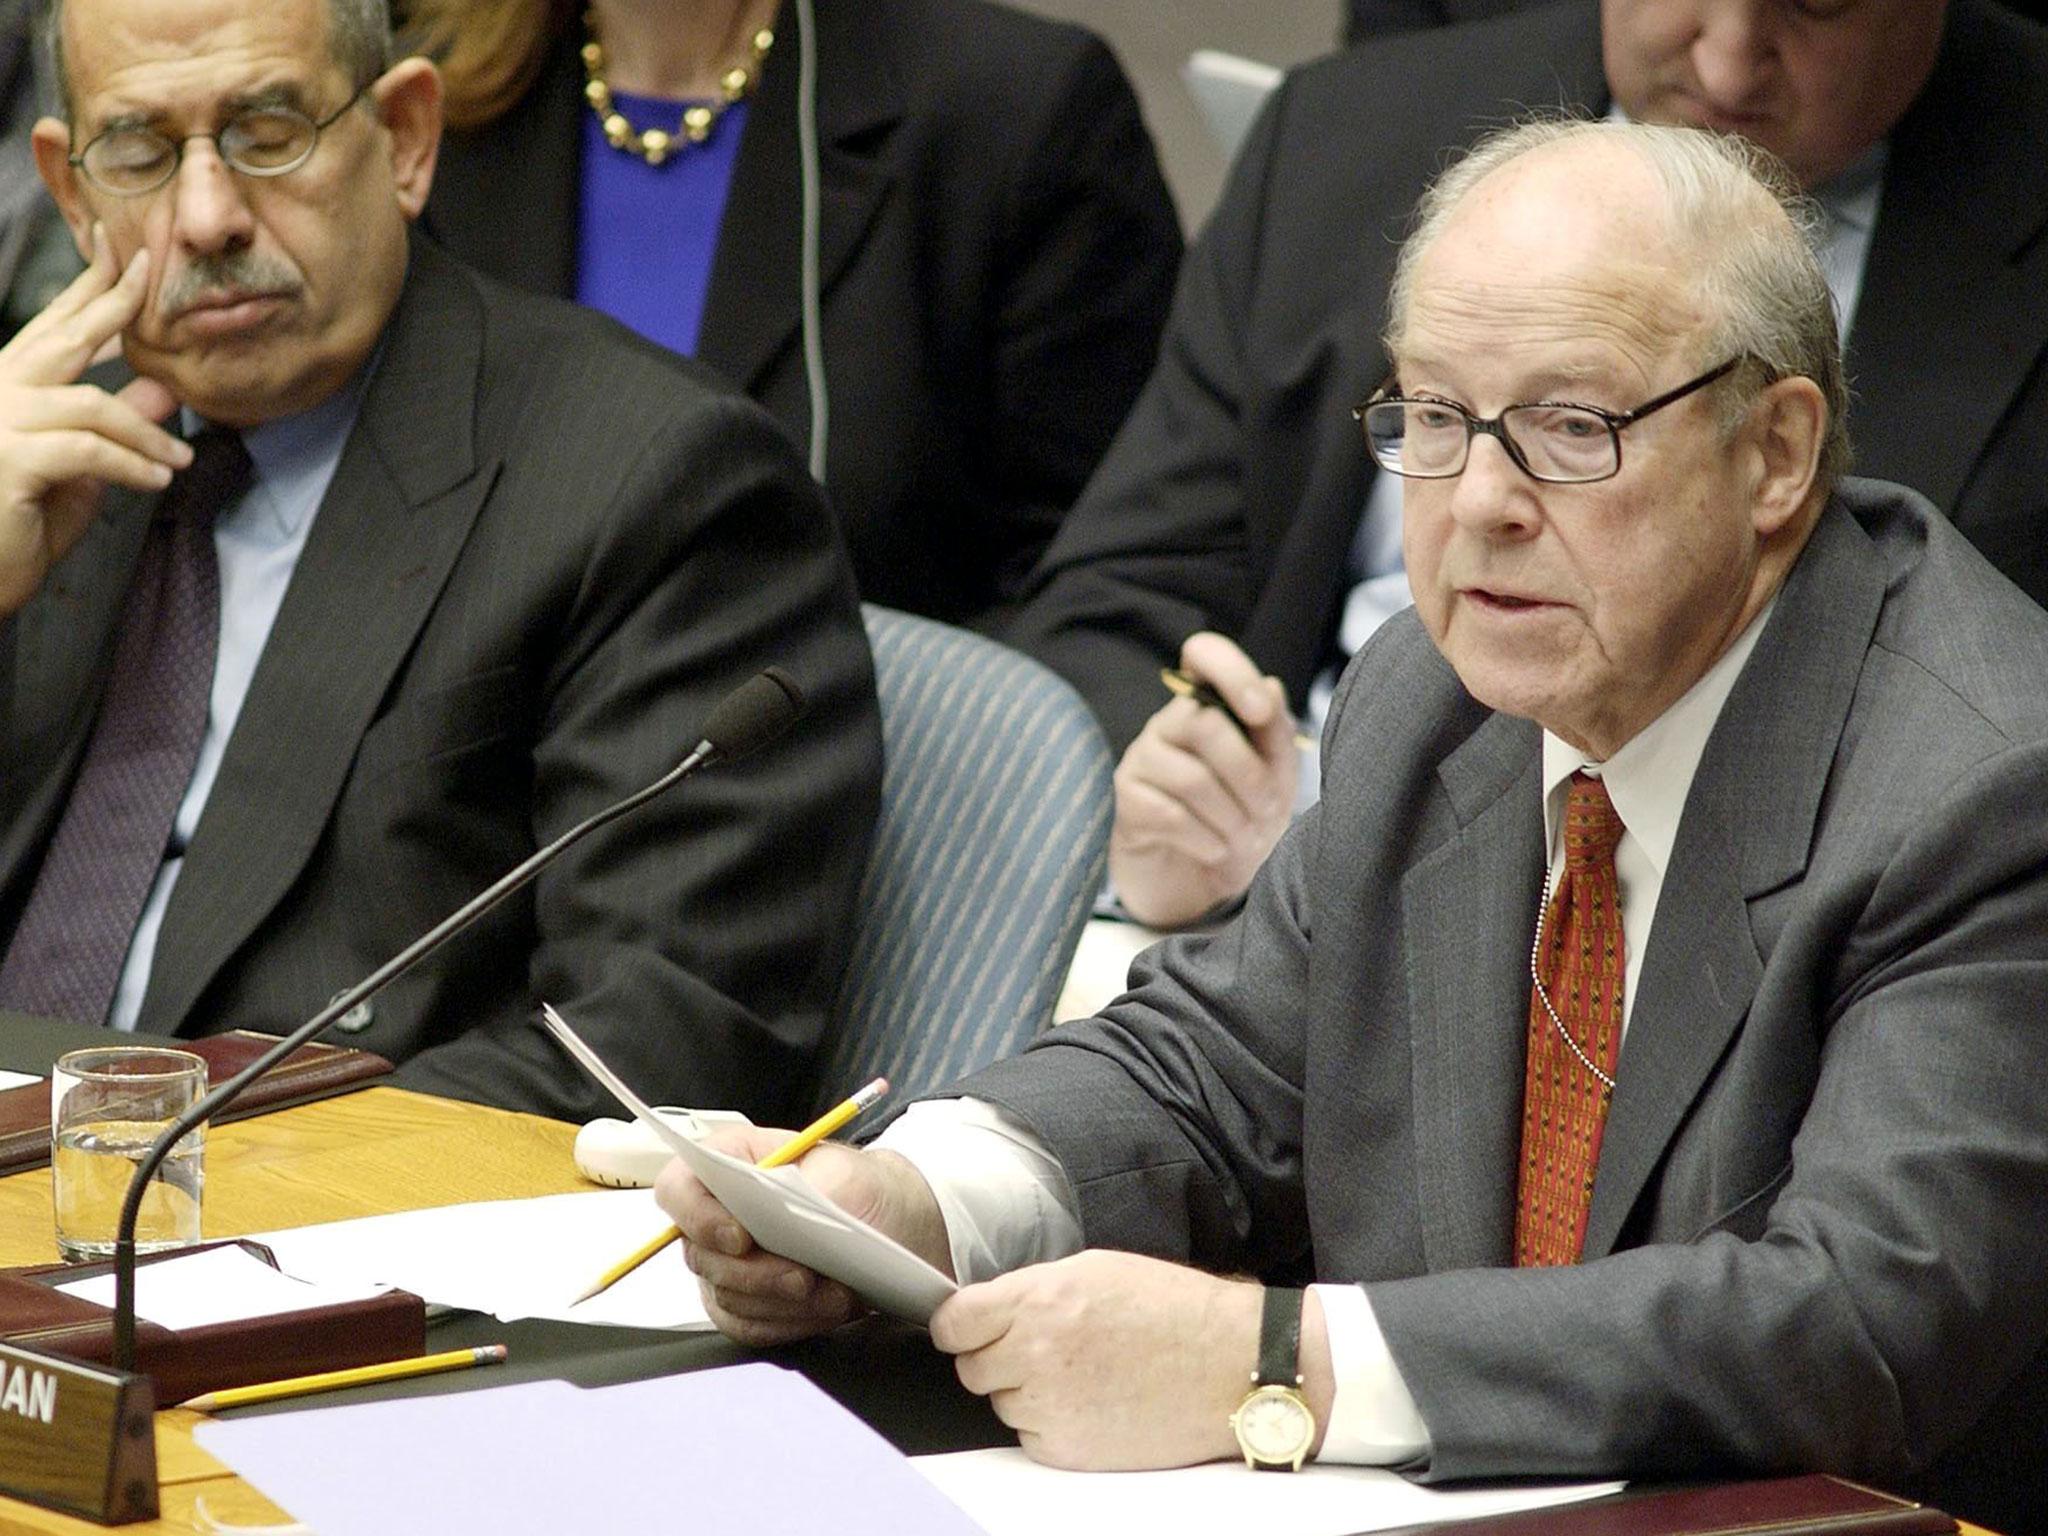 February 2003: Hans Blix addresses the UN security council on the search for weapons of mass destruction